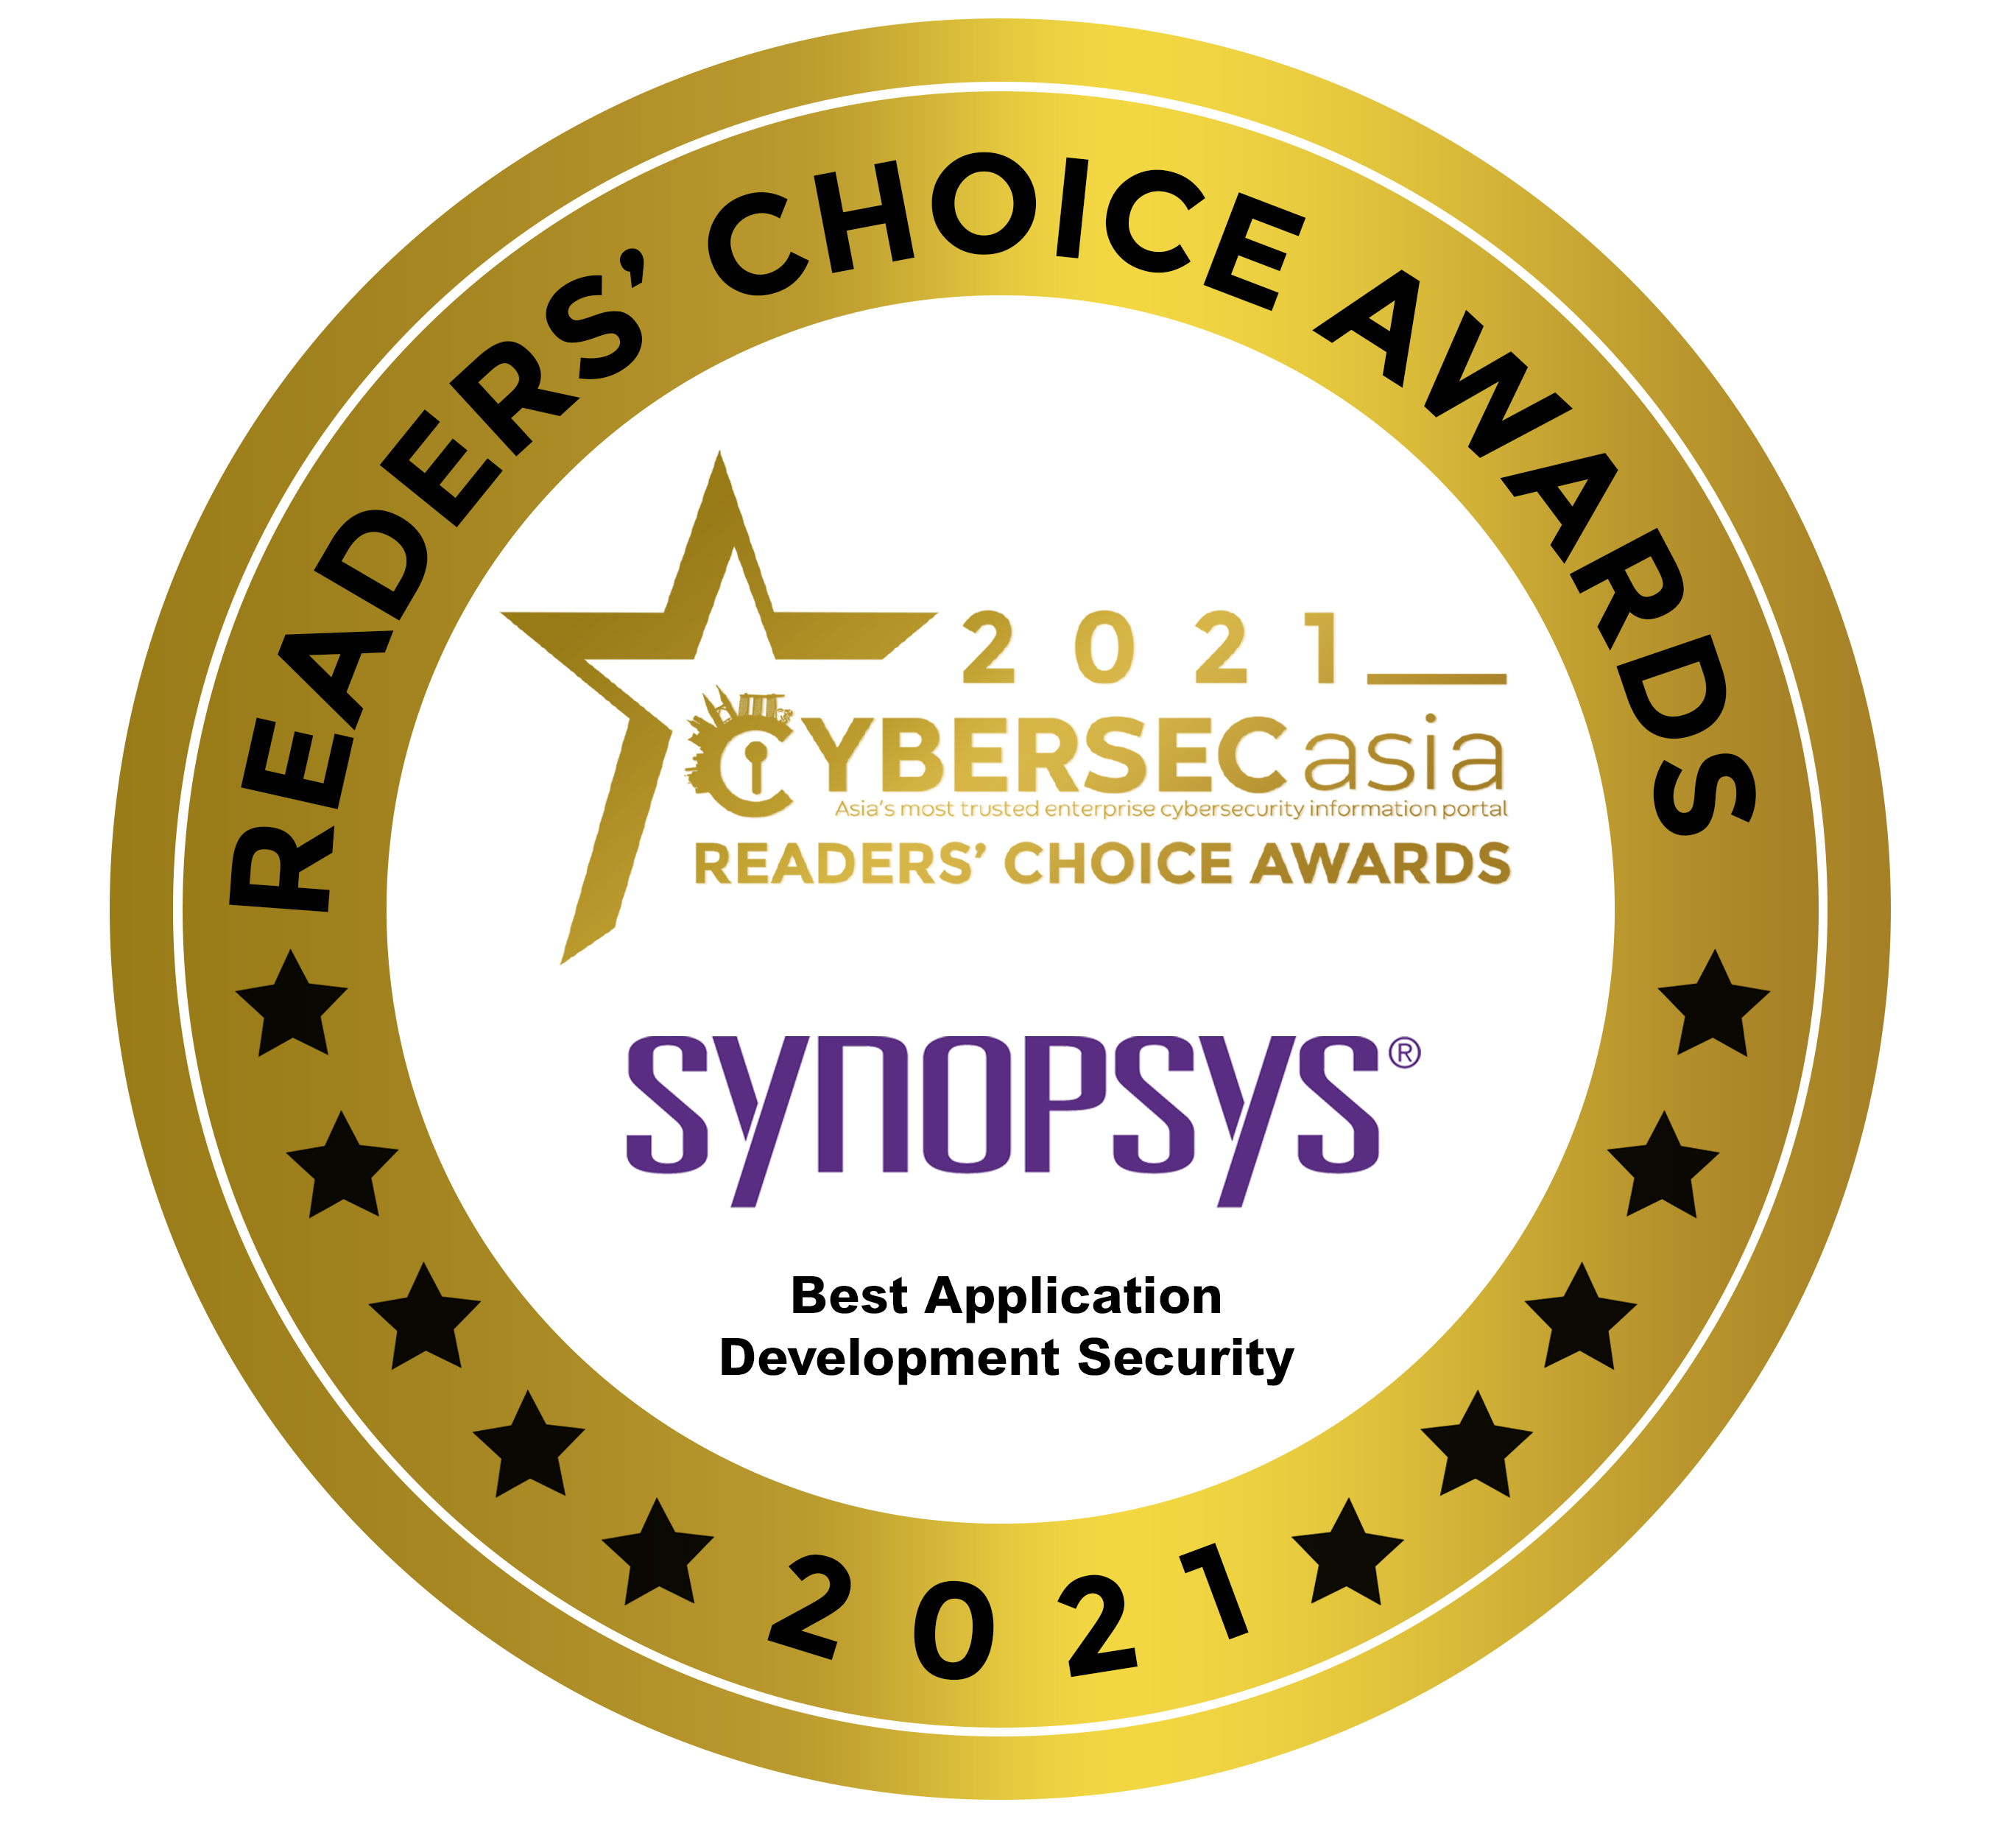 Readers' Choice Awards 2021 Best Application Development Security: IAST Software